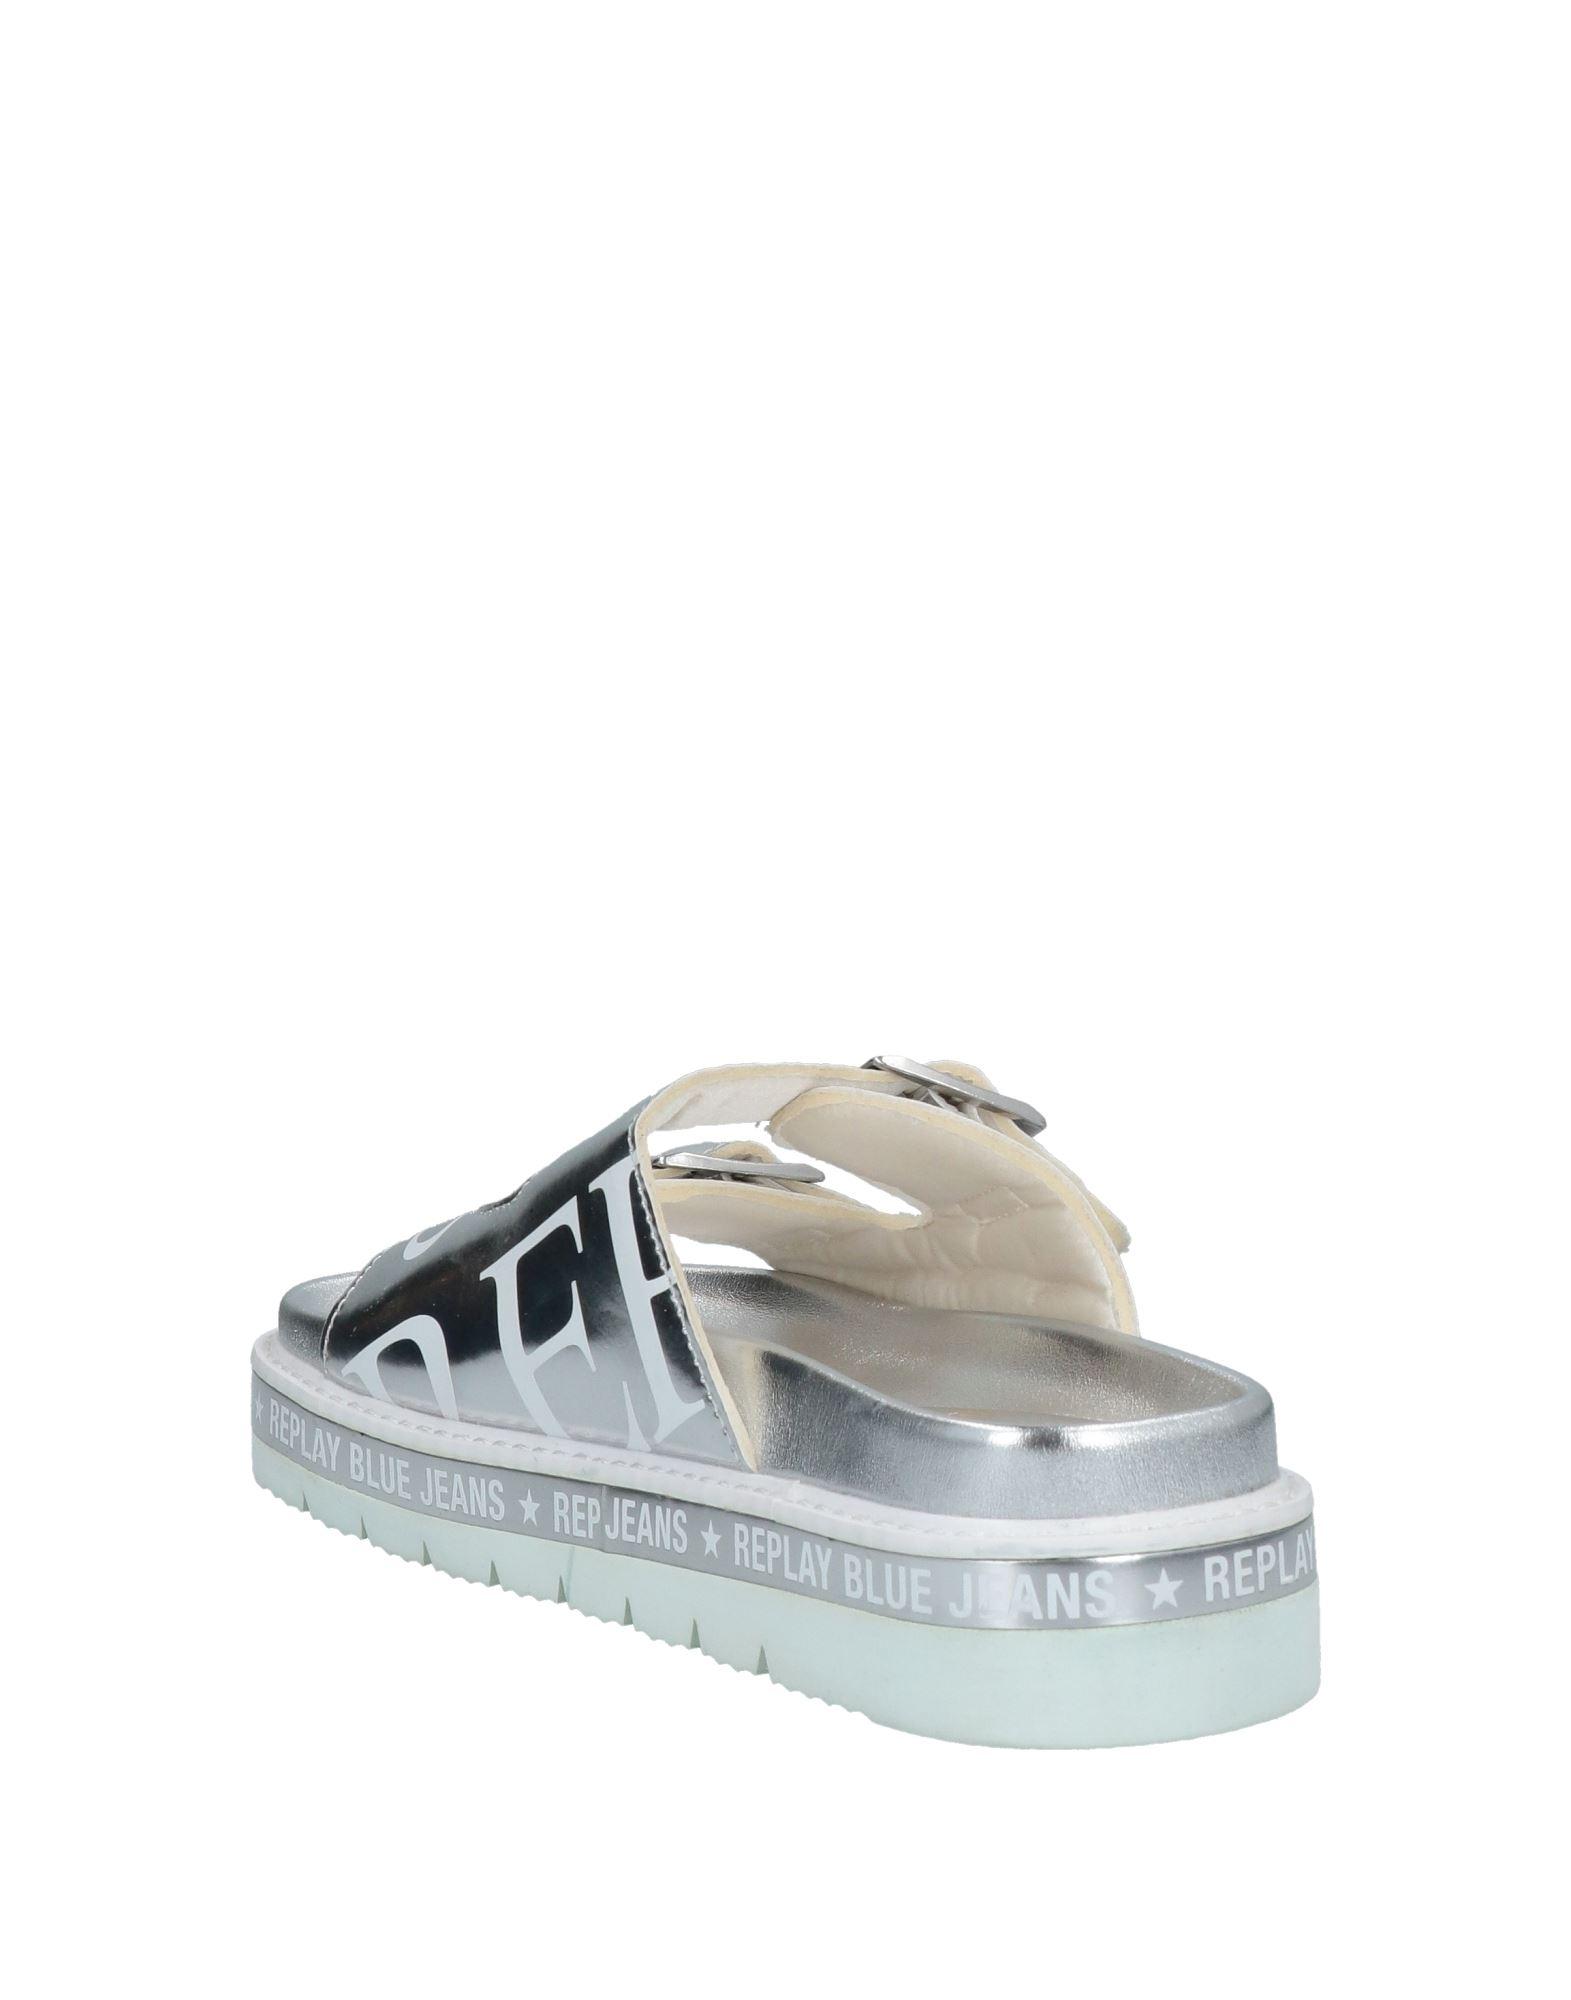 Replay Rubber Sandals in Silver (Metallic) | Lyst